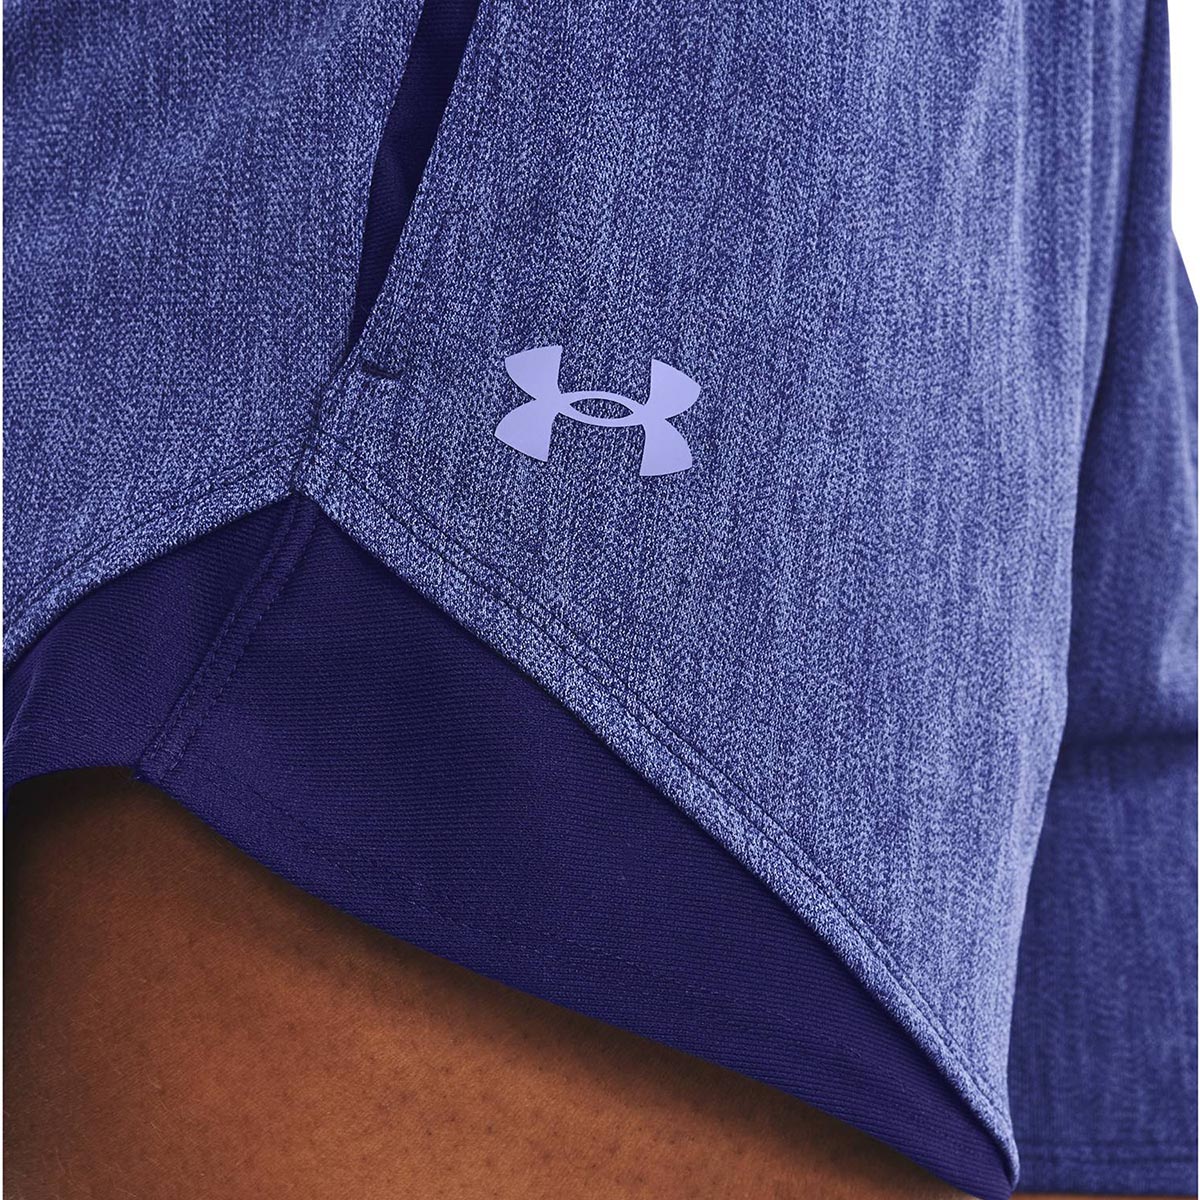 UNDER ARMOUR - PLAY UP TWIST SHORTS 3.0